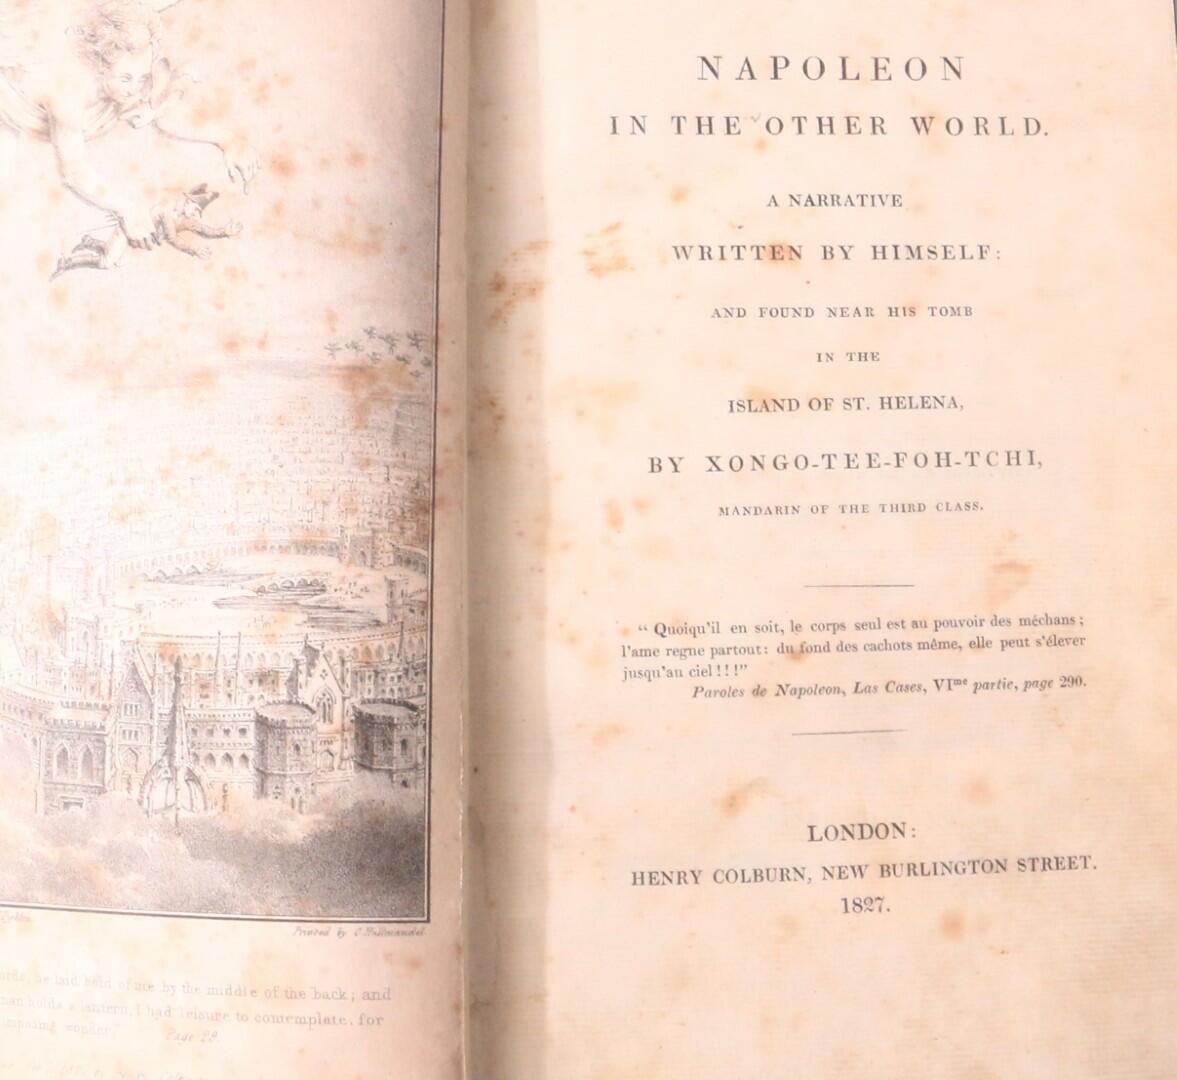 Xongo-Tee-Foh-Tchi - Napoleon in the Other World: A Narrative Written by Himself: And Found near his Tomb in the Island of St Helena - Henry Colbun, 1827, First Edition.